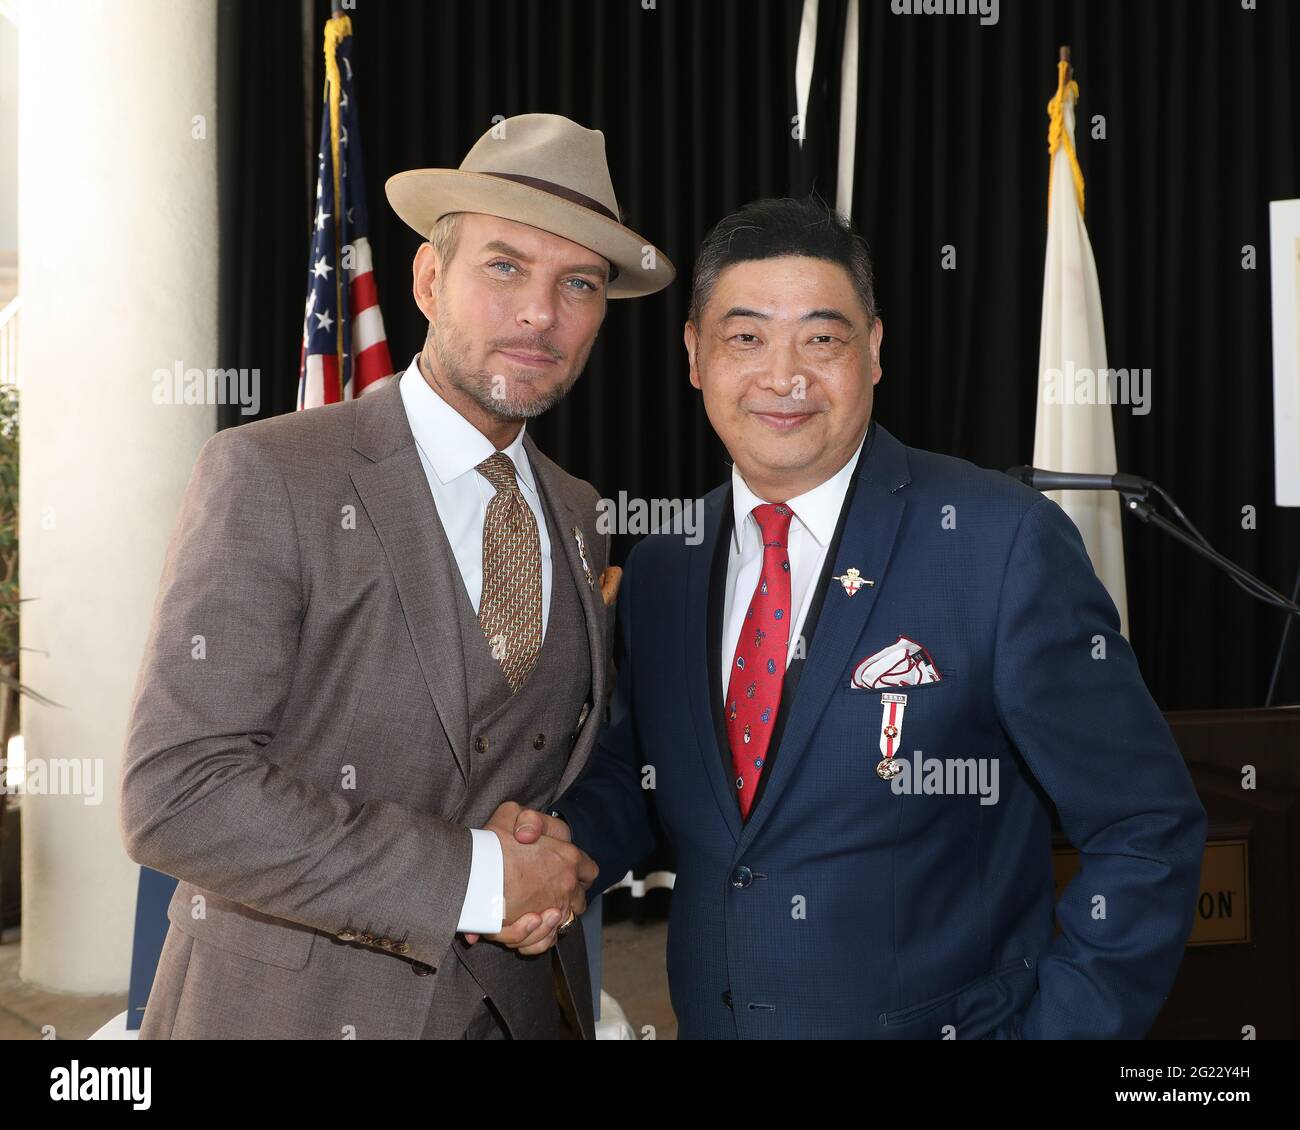 Beverly Hills, California, USA. 6th June, 2021.  attending the Royal Society of St. George, California Branch Honorary Membership Ceremony for Matt Goss and Laura Angelini at the Beverly Hilton Hotel in Beverly Hills, California.  Credit: Sheri Determan Stock Photo